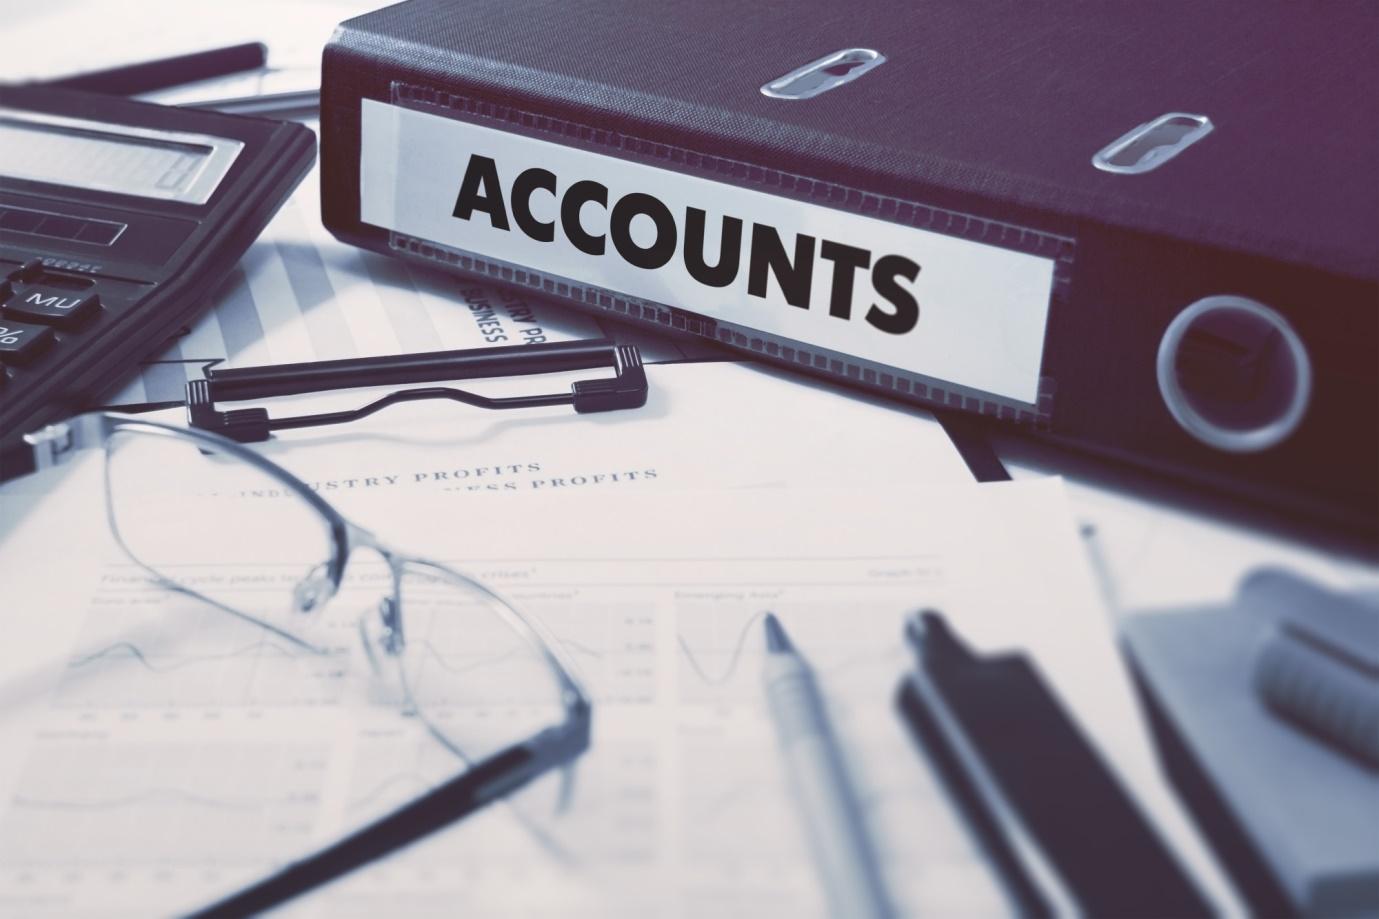 Accounts Payable vs. Accounts Receivable: What's the Difference?